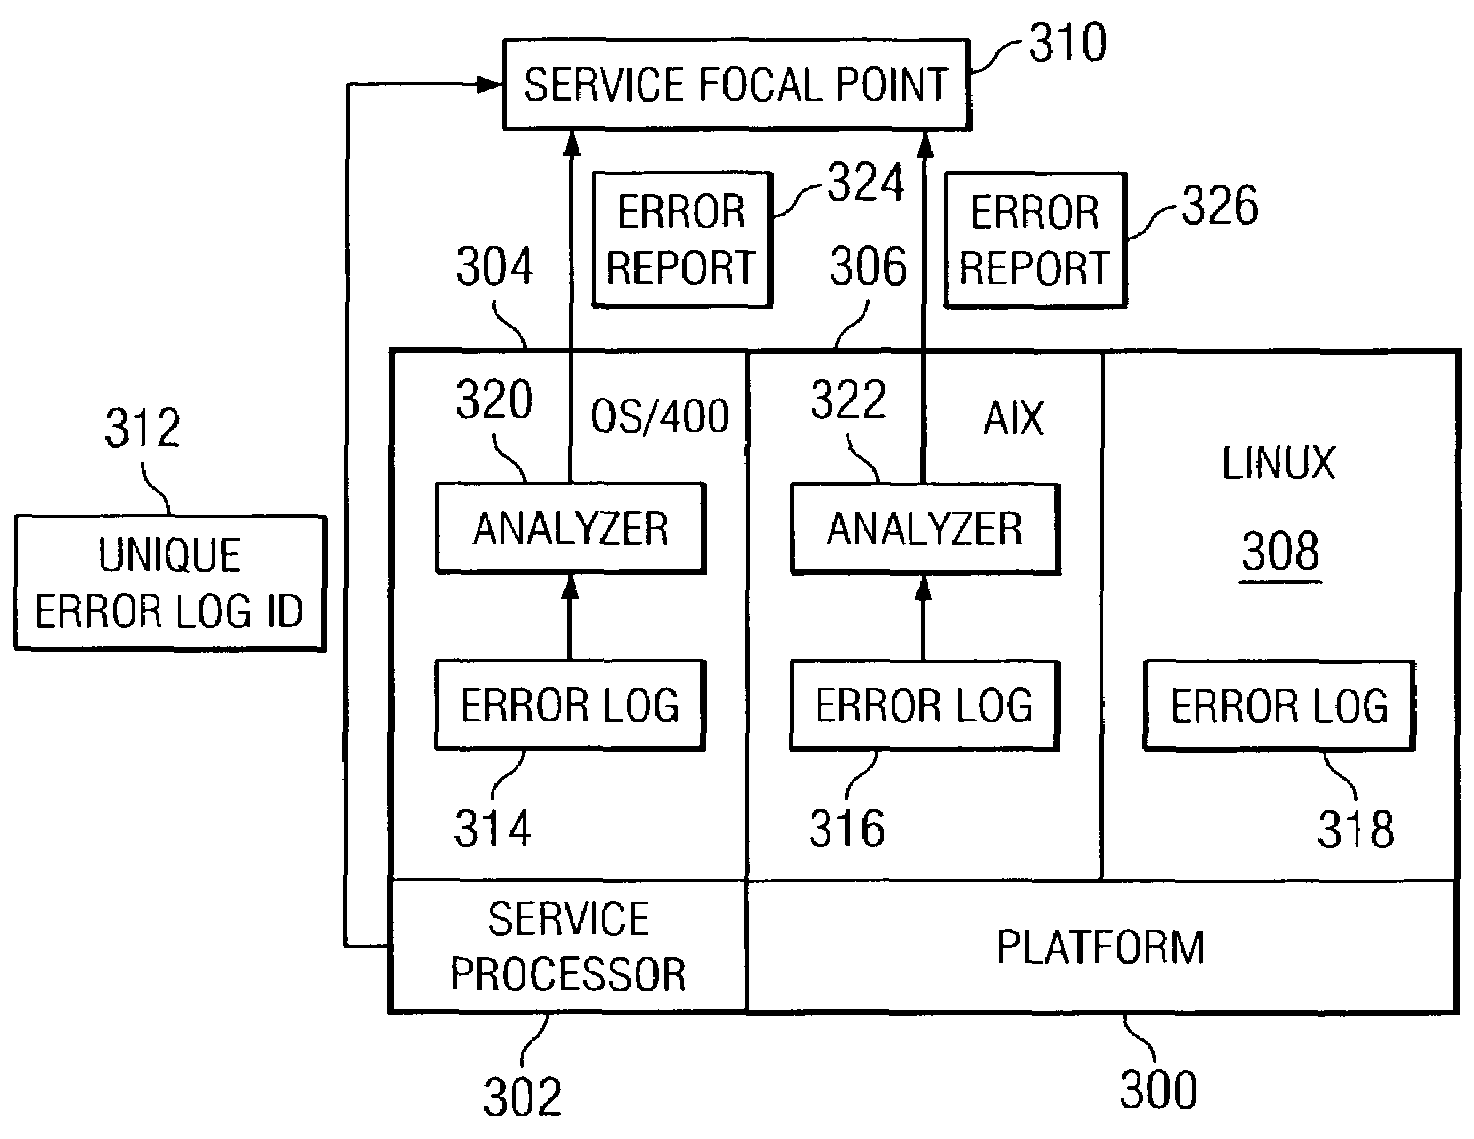 Method and apparatus for reporting global errors on heterogeneous partitioned systems